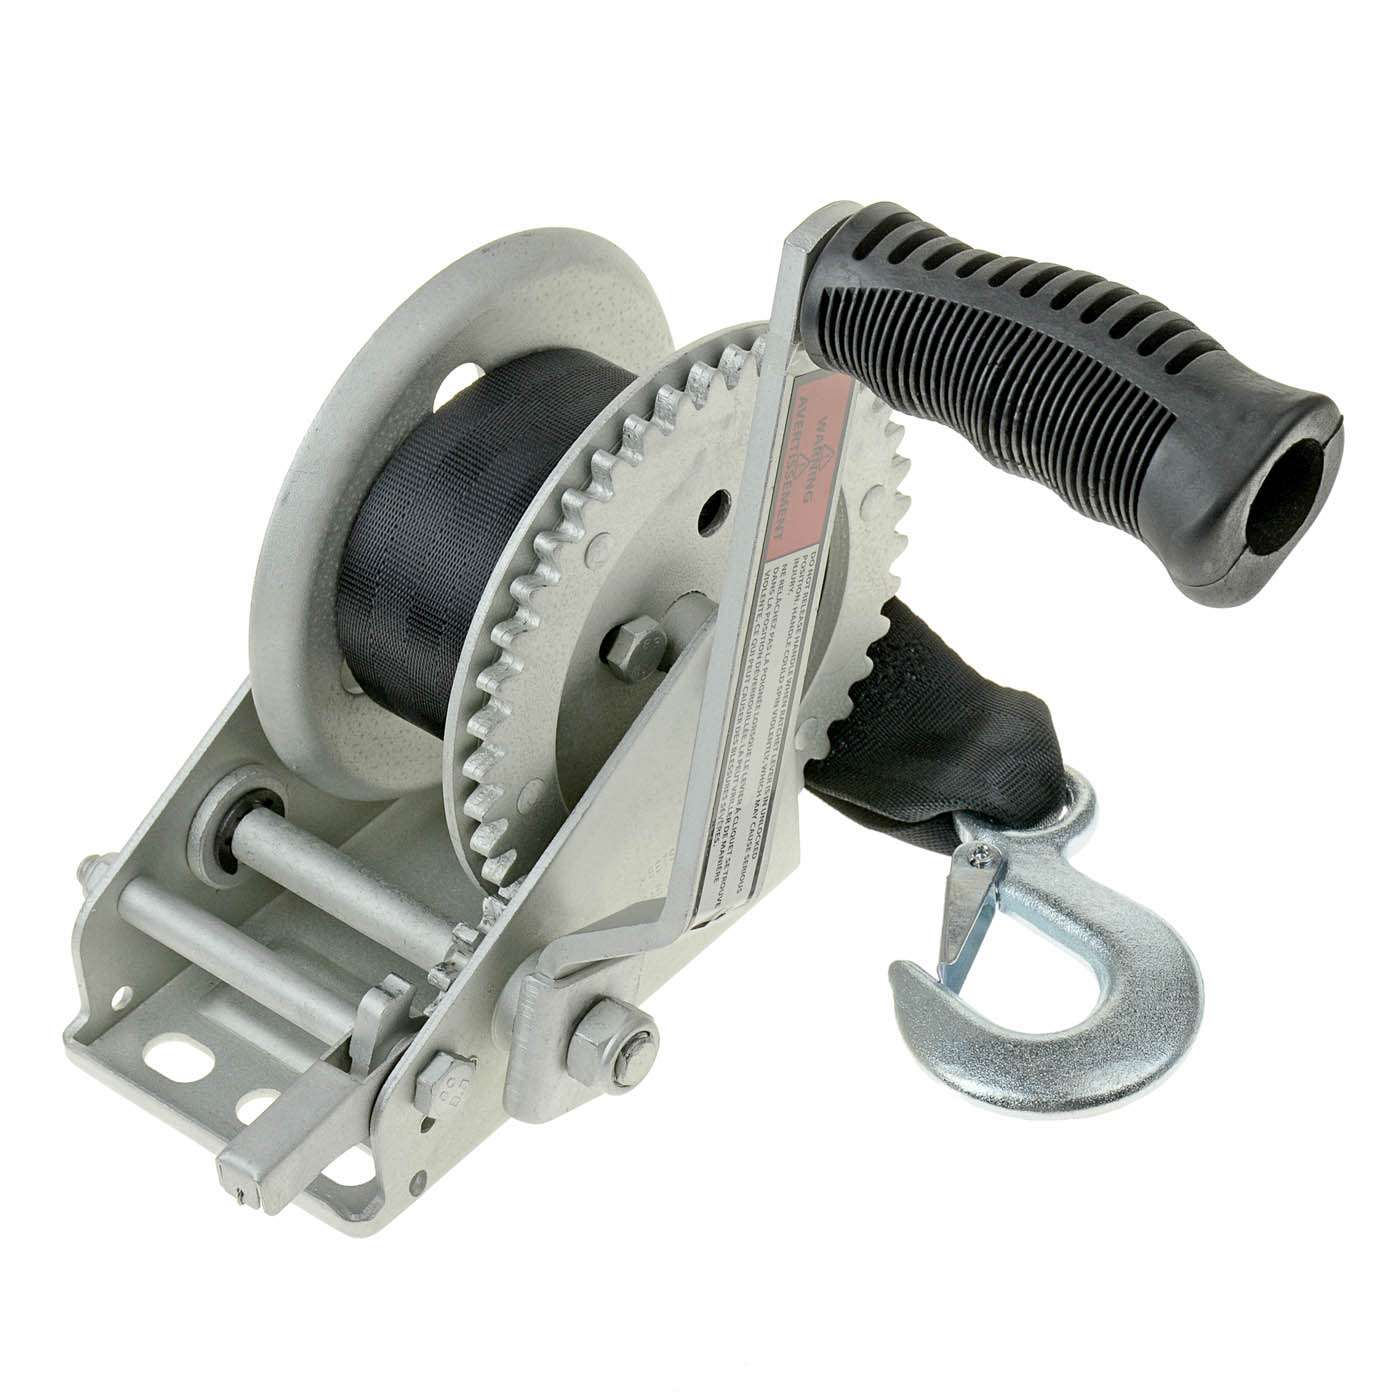 <p><strong>T-H Marine 1,000-pound Trailer Winch</strong></p><p>T-H Marineâs 1000lb Trailer Winch is built tough with corrosion-resistant, hardened stacked steel gears, and a 4:1 gear ratio. Each winch has two-way ratcheting and neutral built in, along with a 2â x 20â strap and strap bolt, making it an ideal replacement part when needed. $44.99. <a href=